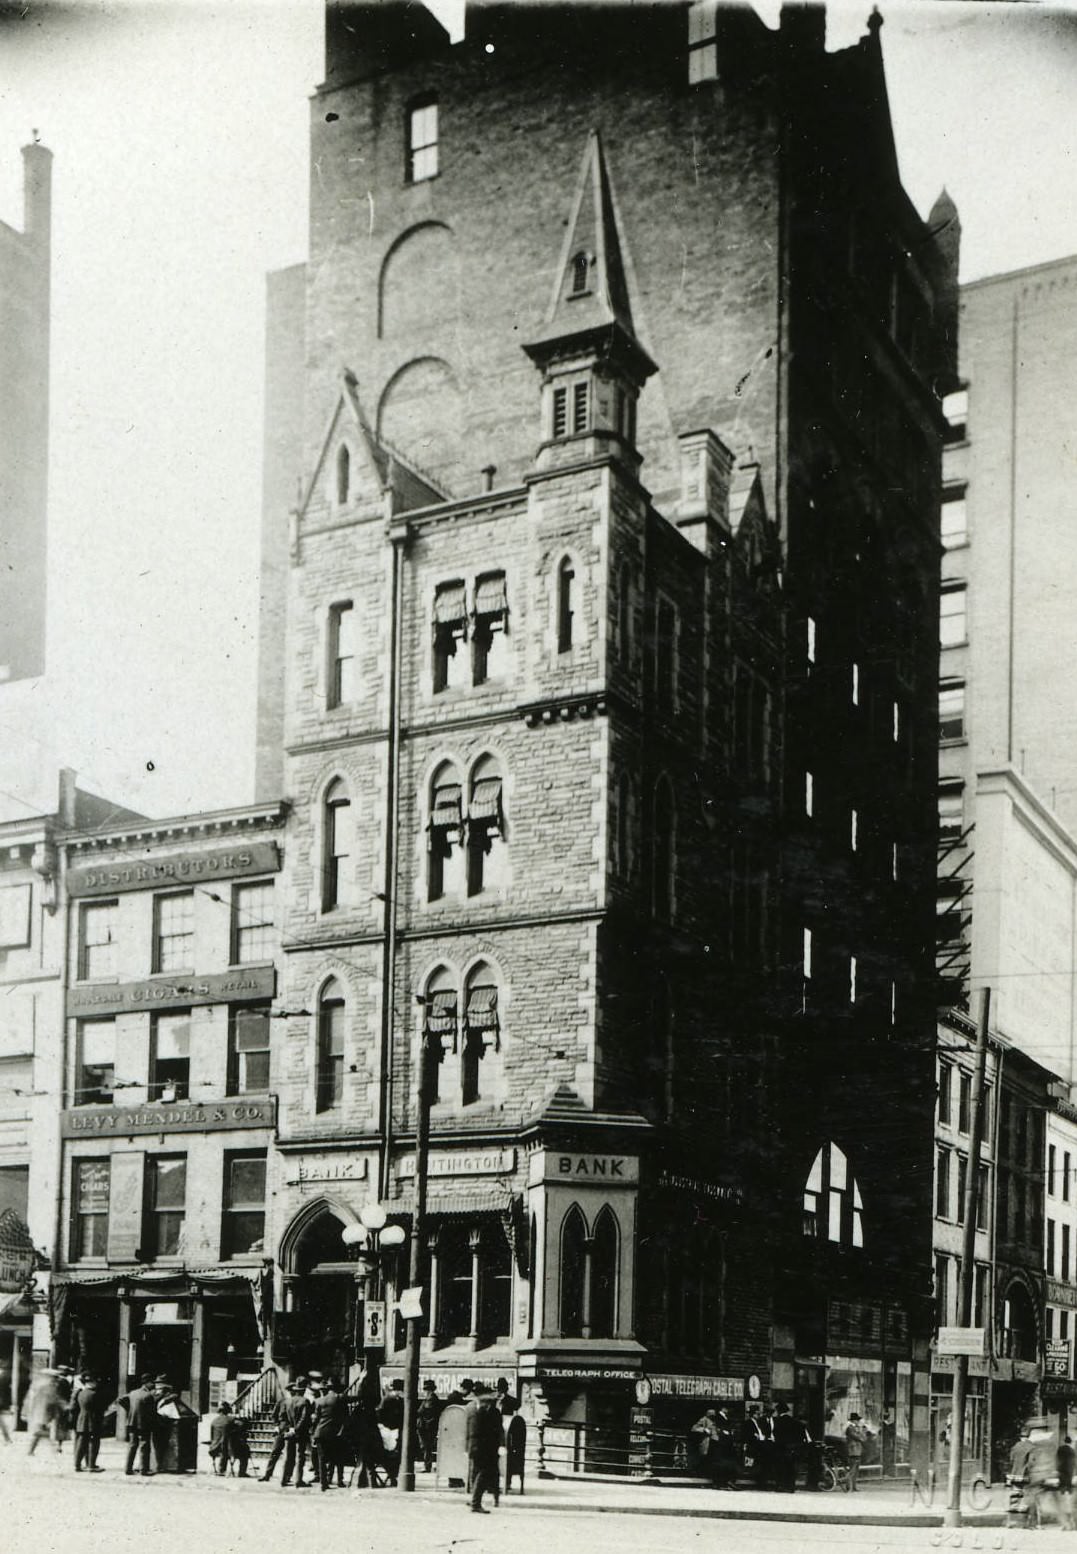 Huntington National Bank, opened 1878, first location at 1 S High Street, 1890s